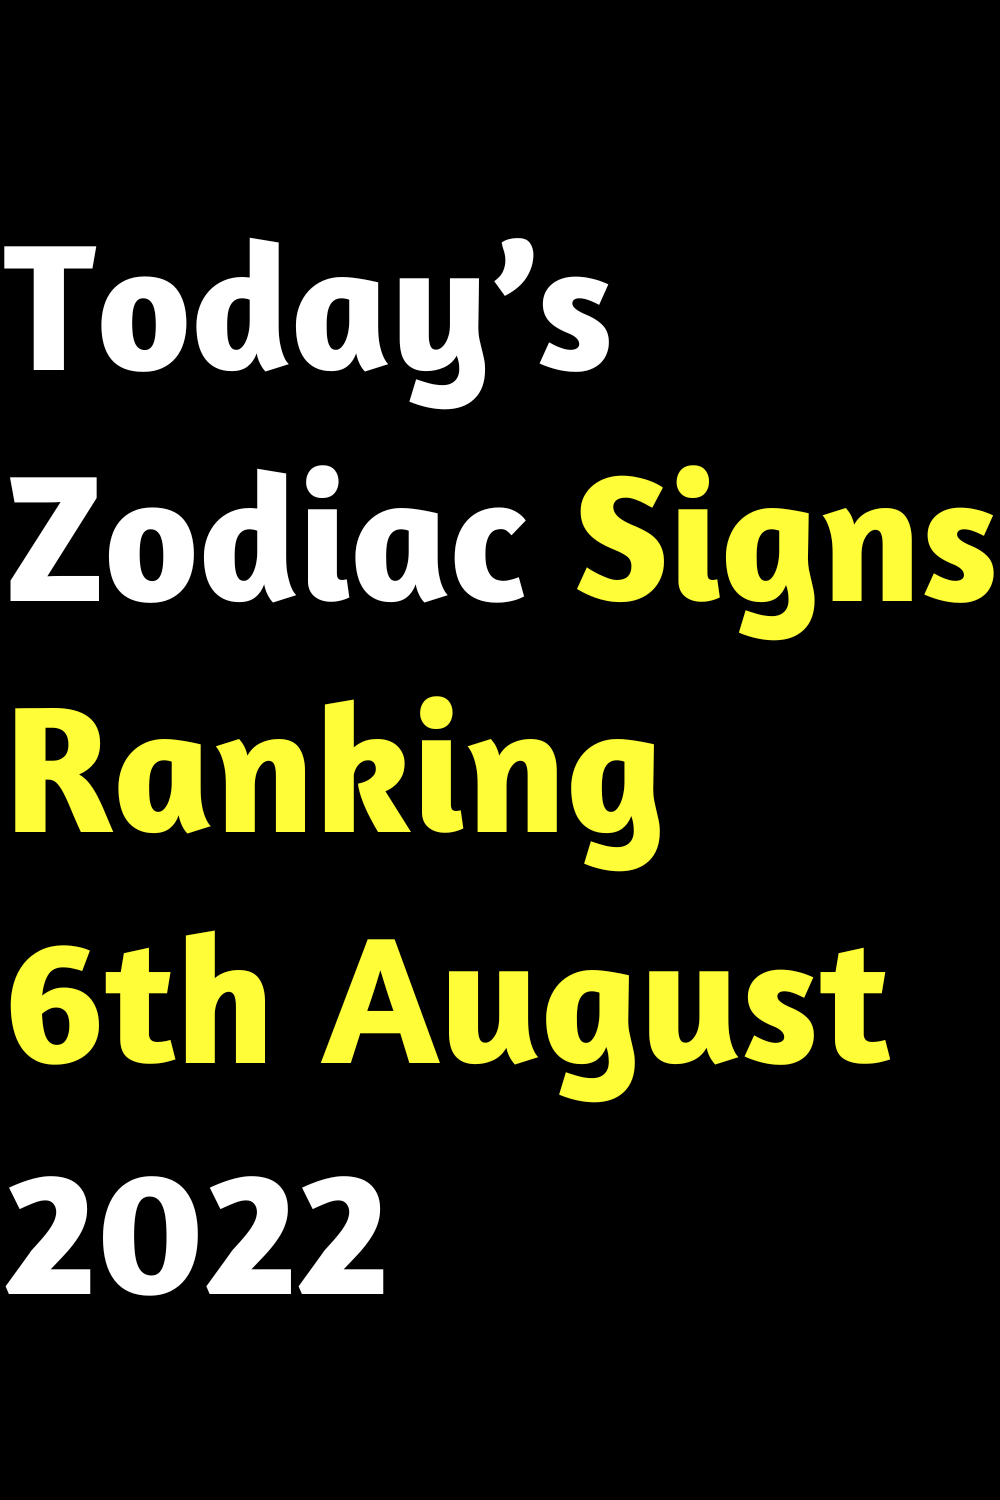 Today’s Zodiac Signs Ranking 6th August 2022